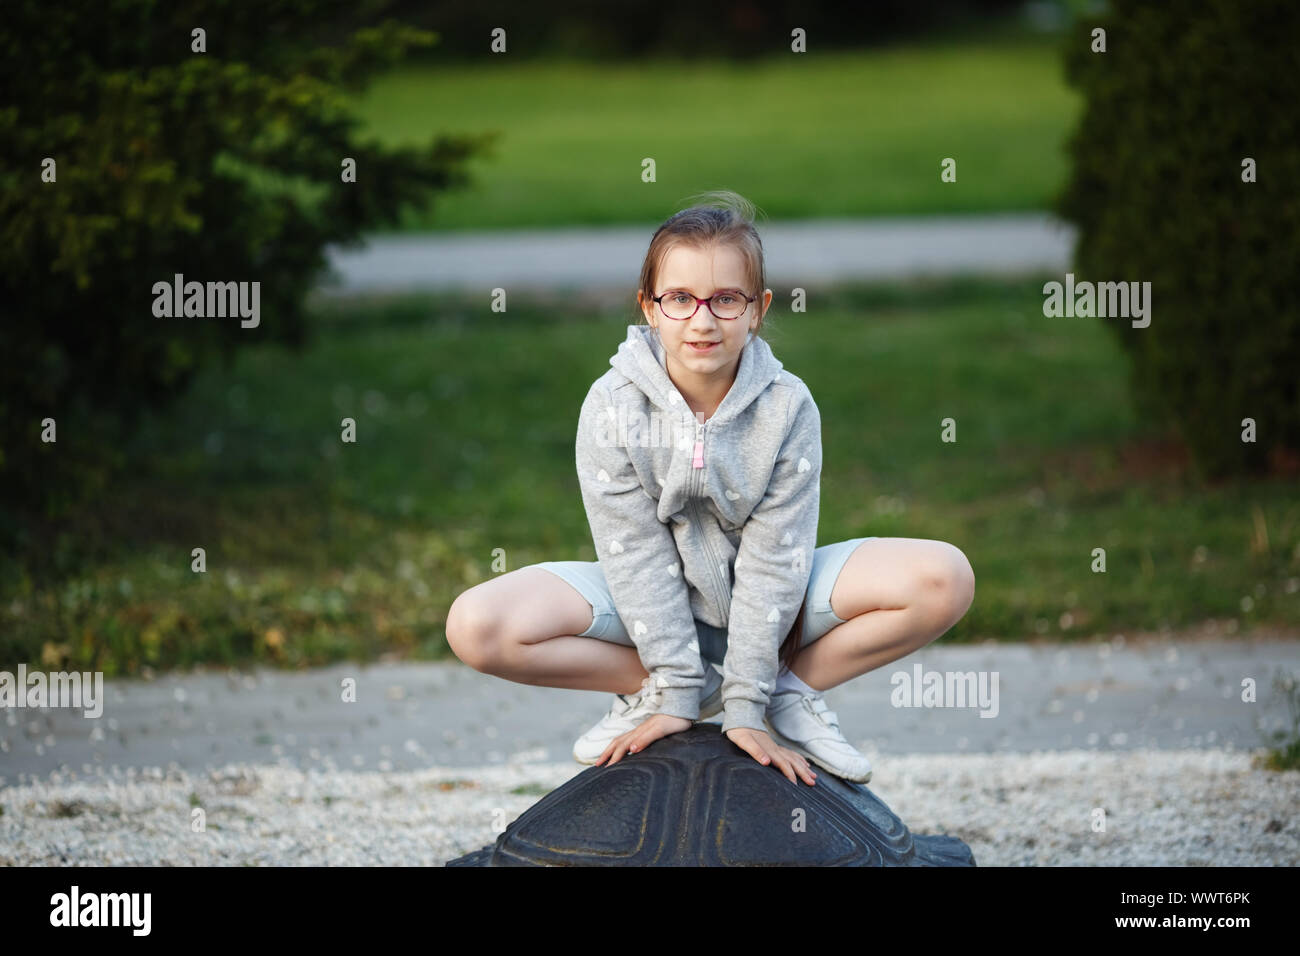 Girl child posing in a frog pose in the park. Child on the playground. Selective focus. Stock Photo